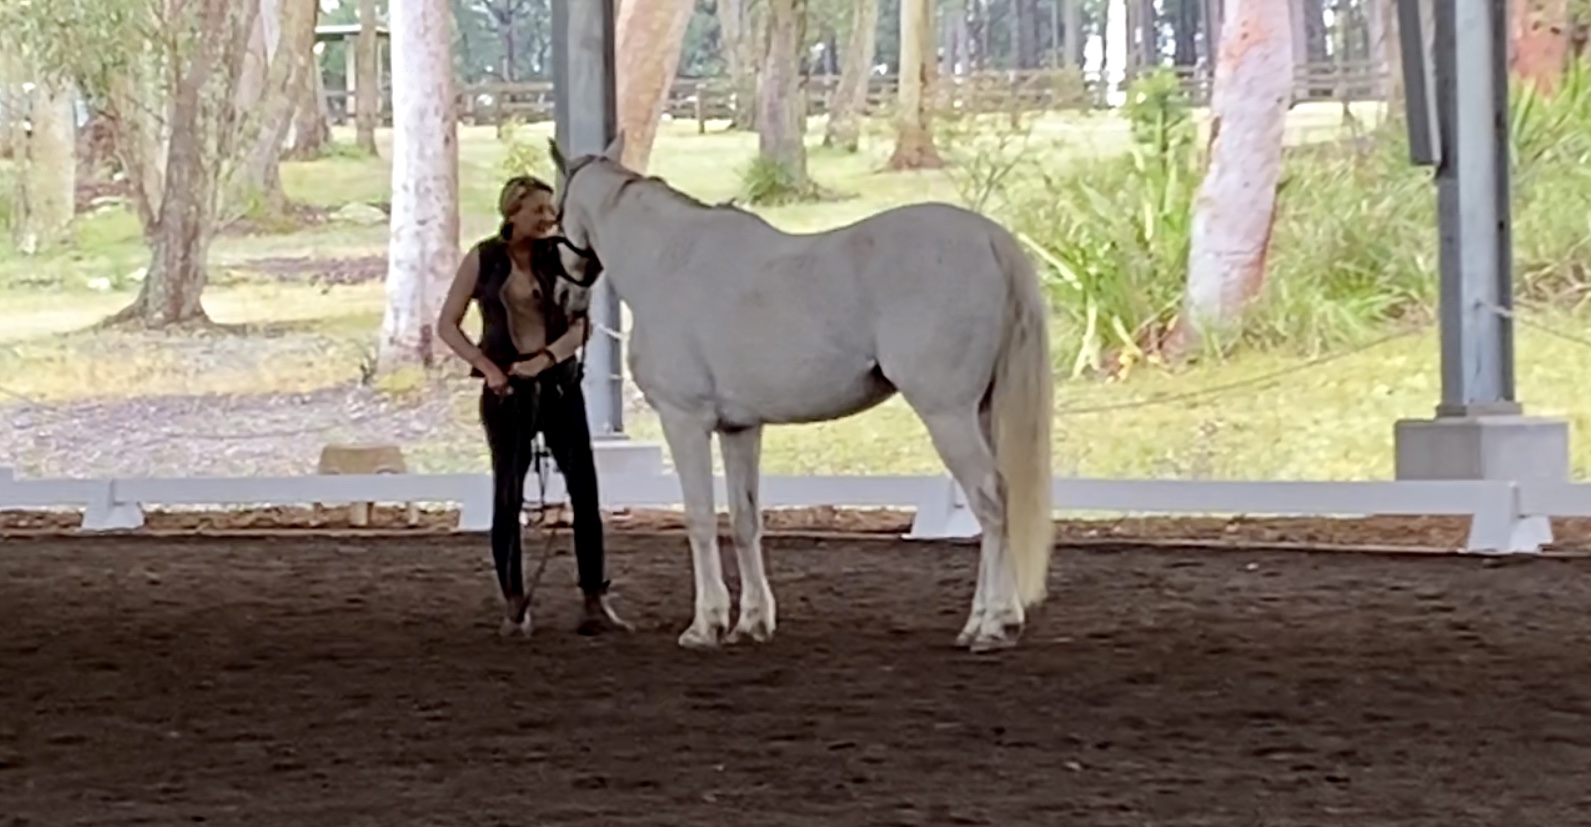 Grey Australian stock horse waiting relaxed and ready for the next task, happy relaxed learning